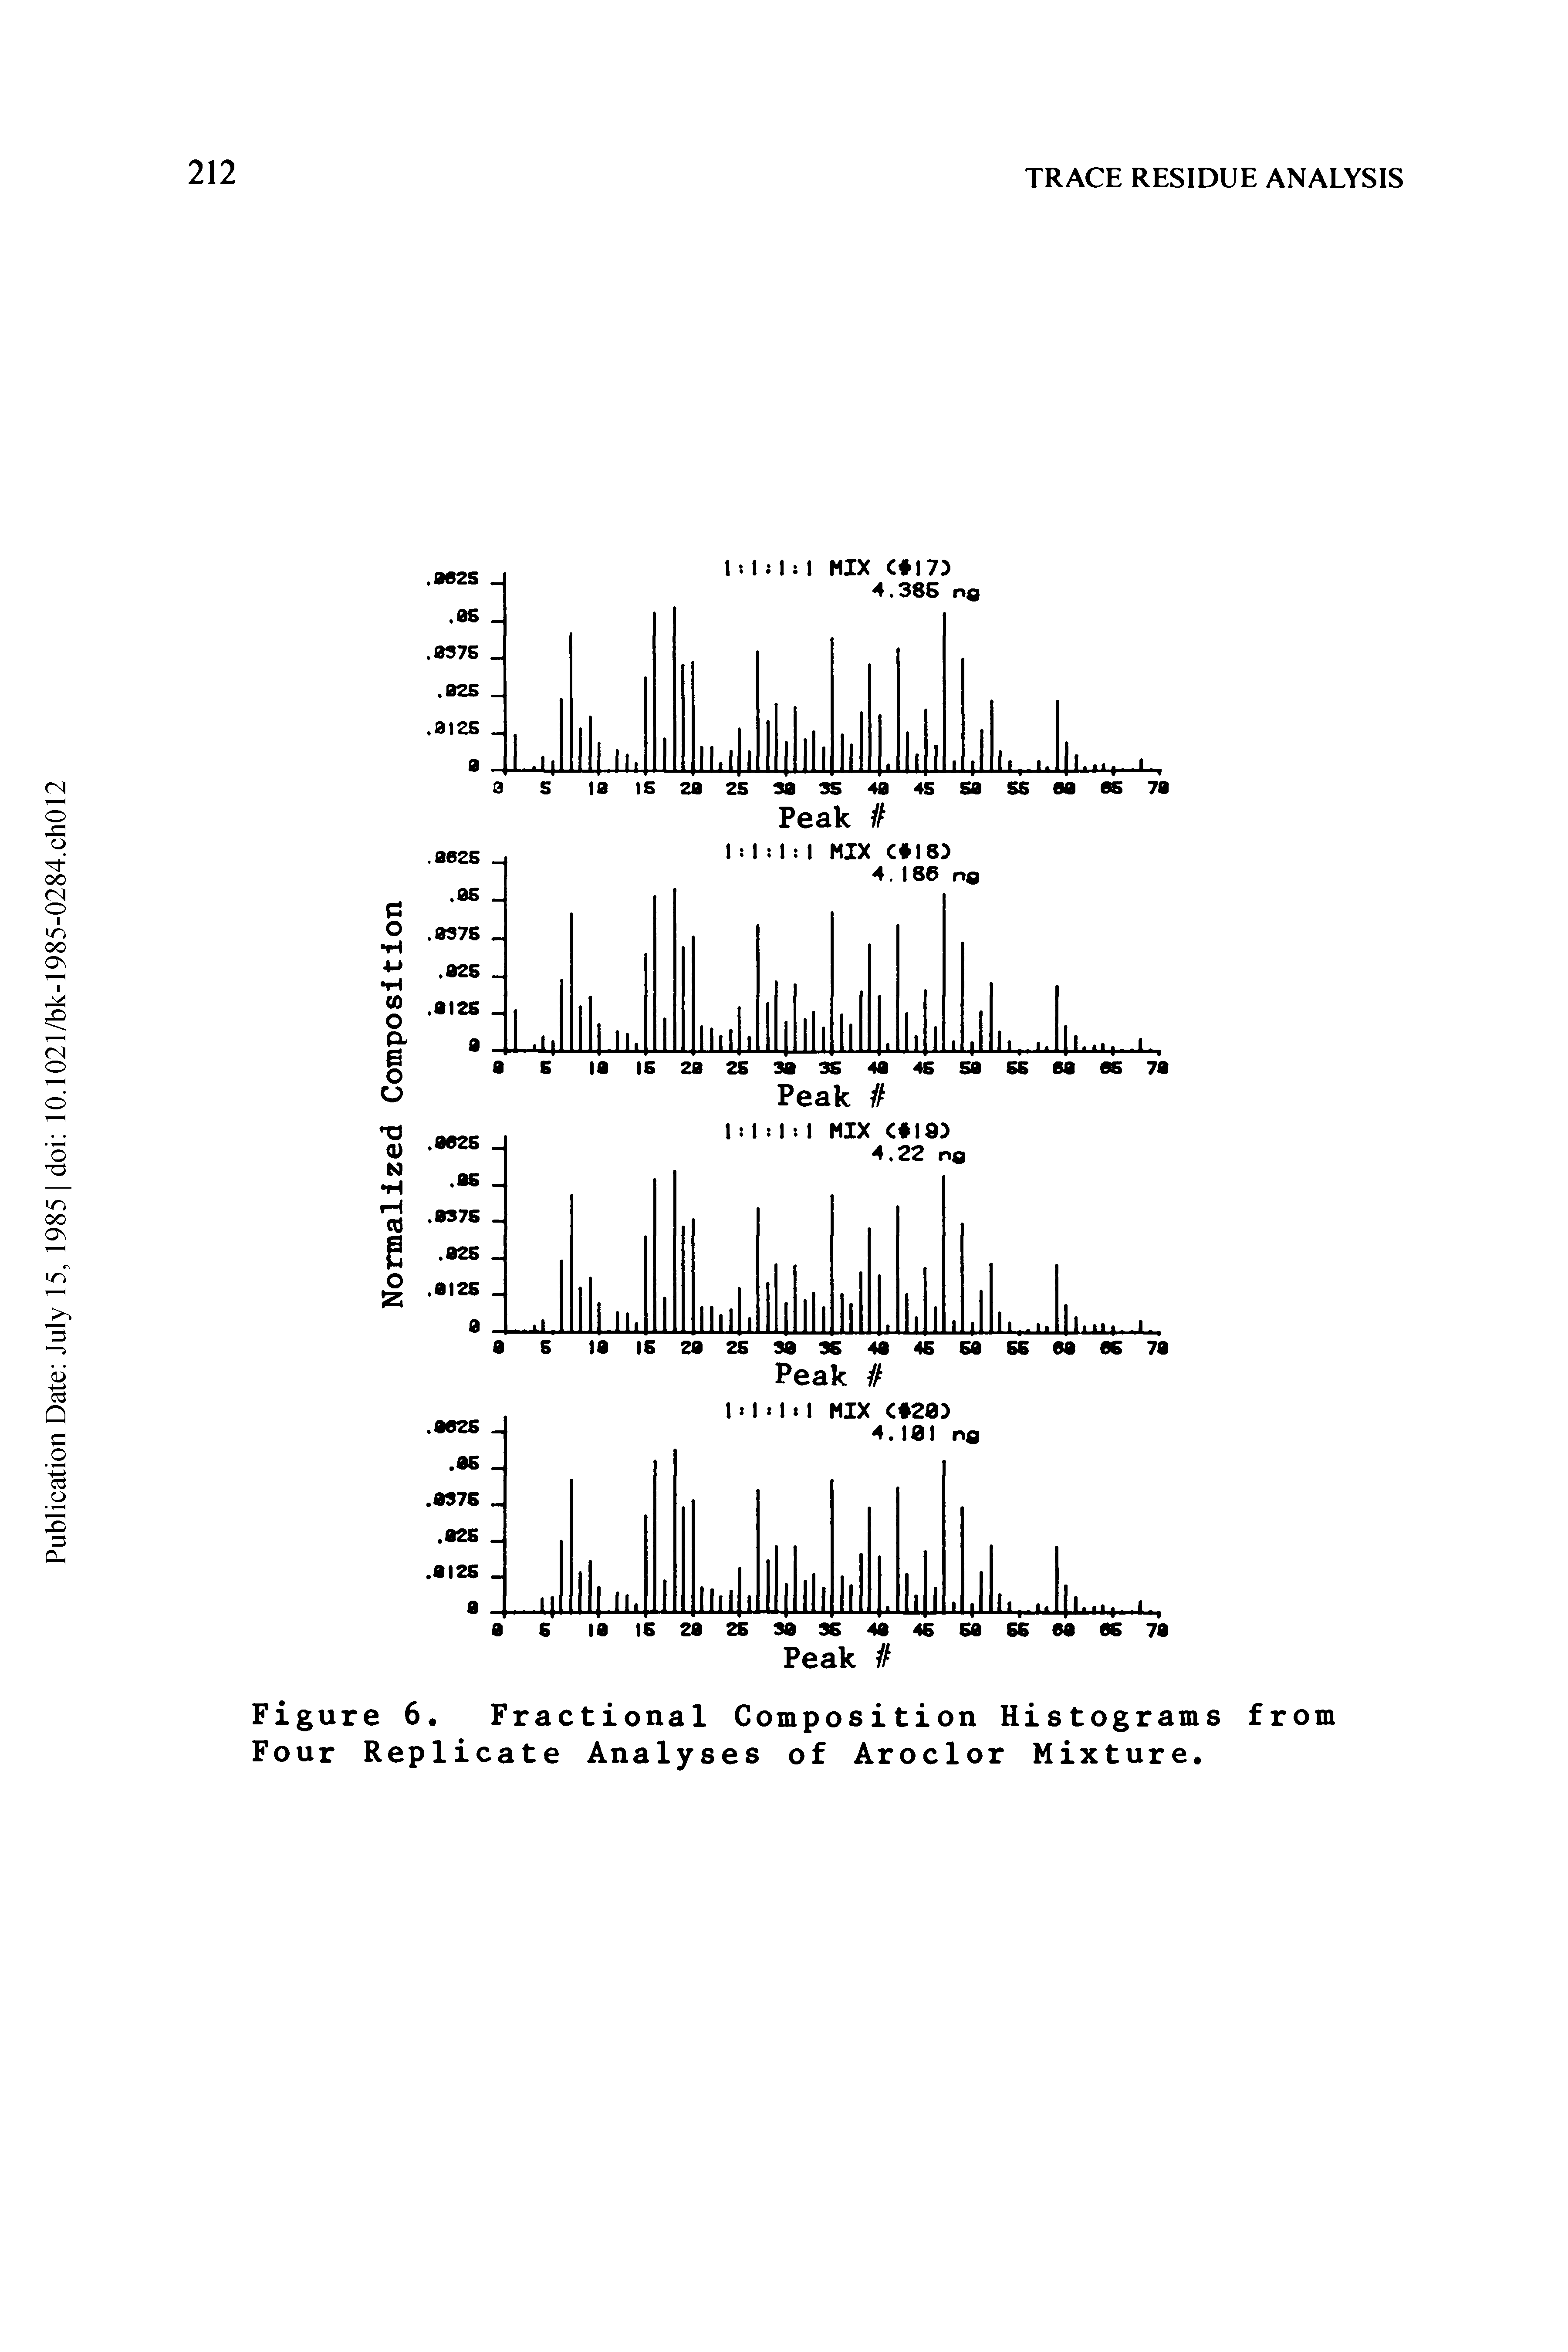 Figure 6. Fractional Composition Histograms from Four Replicate Analyses of Aroclor Mixture.